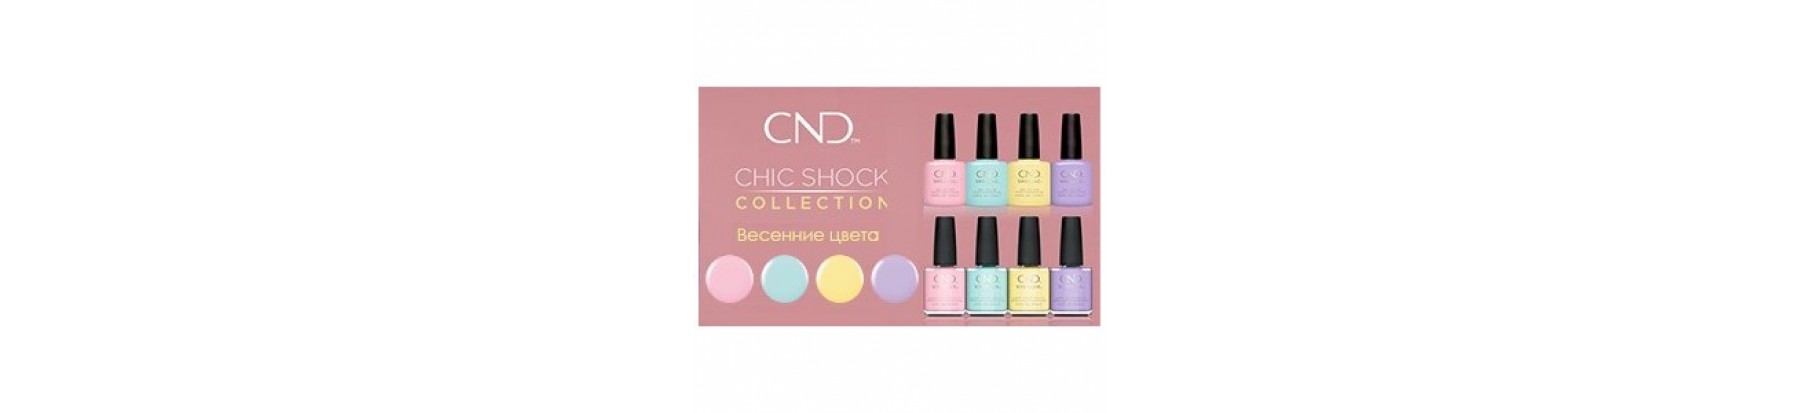 CHIC SHOCK COLLECTION CND VINYLUX